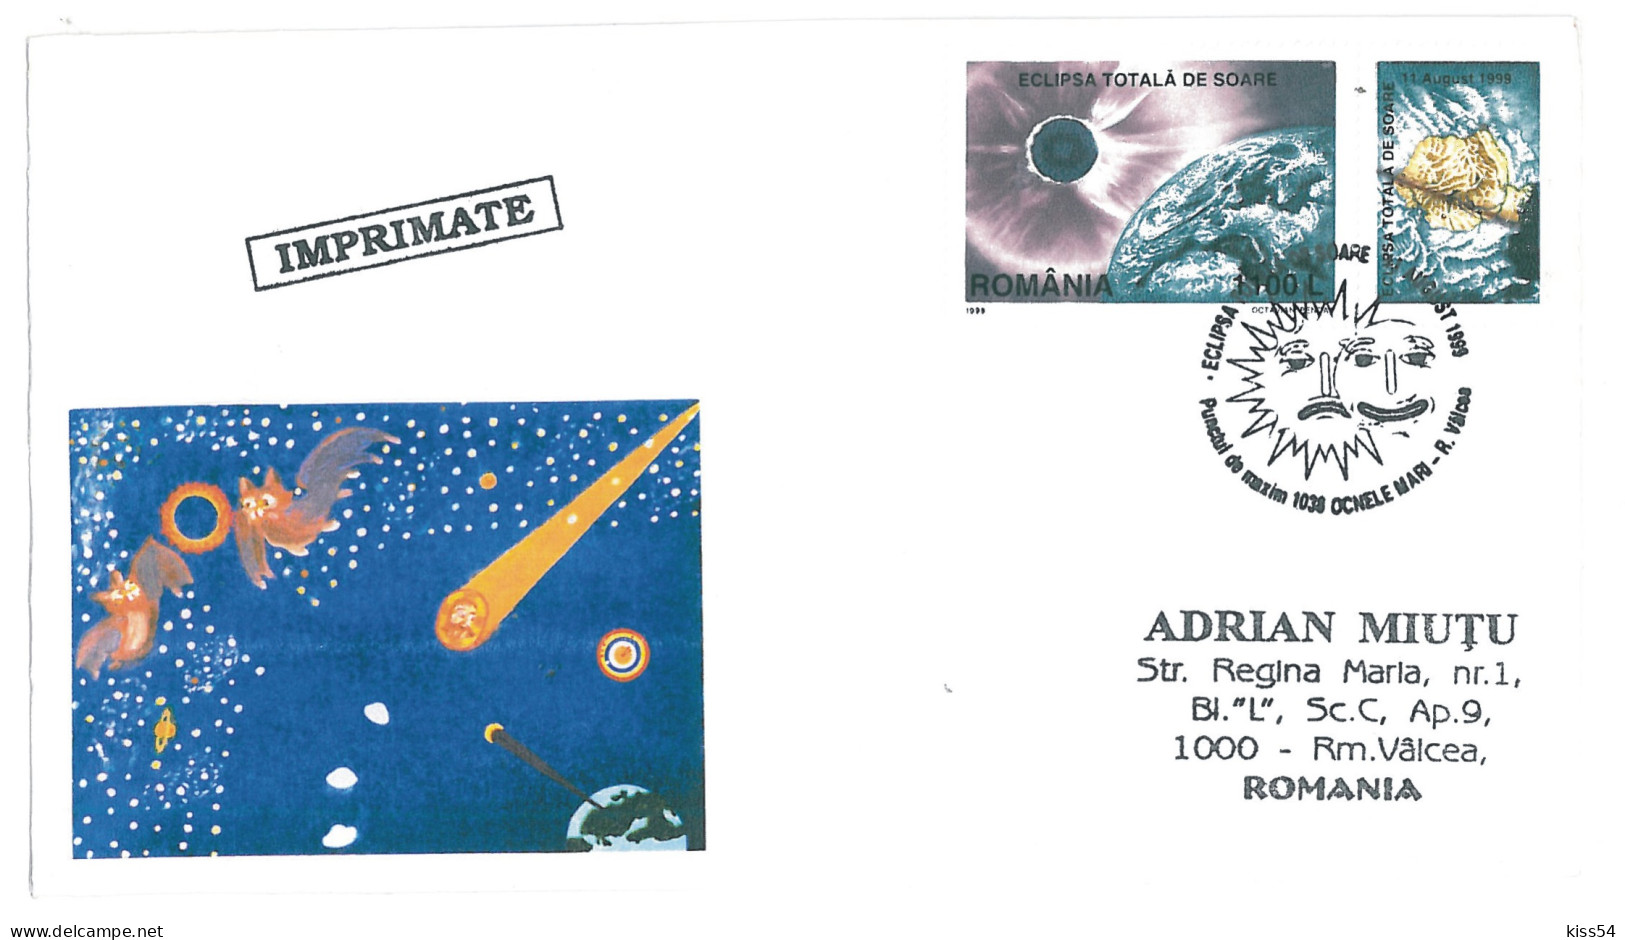 COV 87 - 1513 ASTRONOMY, Total Solar Eclipse, Romania, Stamp With Vignette - Cover - Used - 1999 - Maximumkaarten